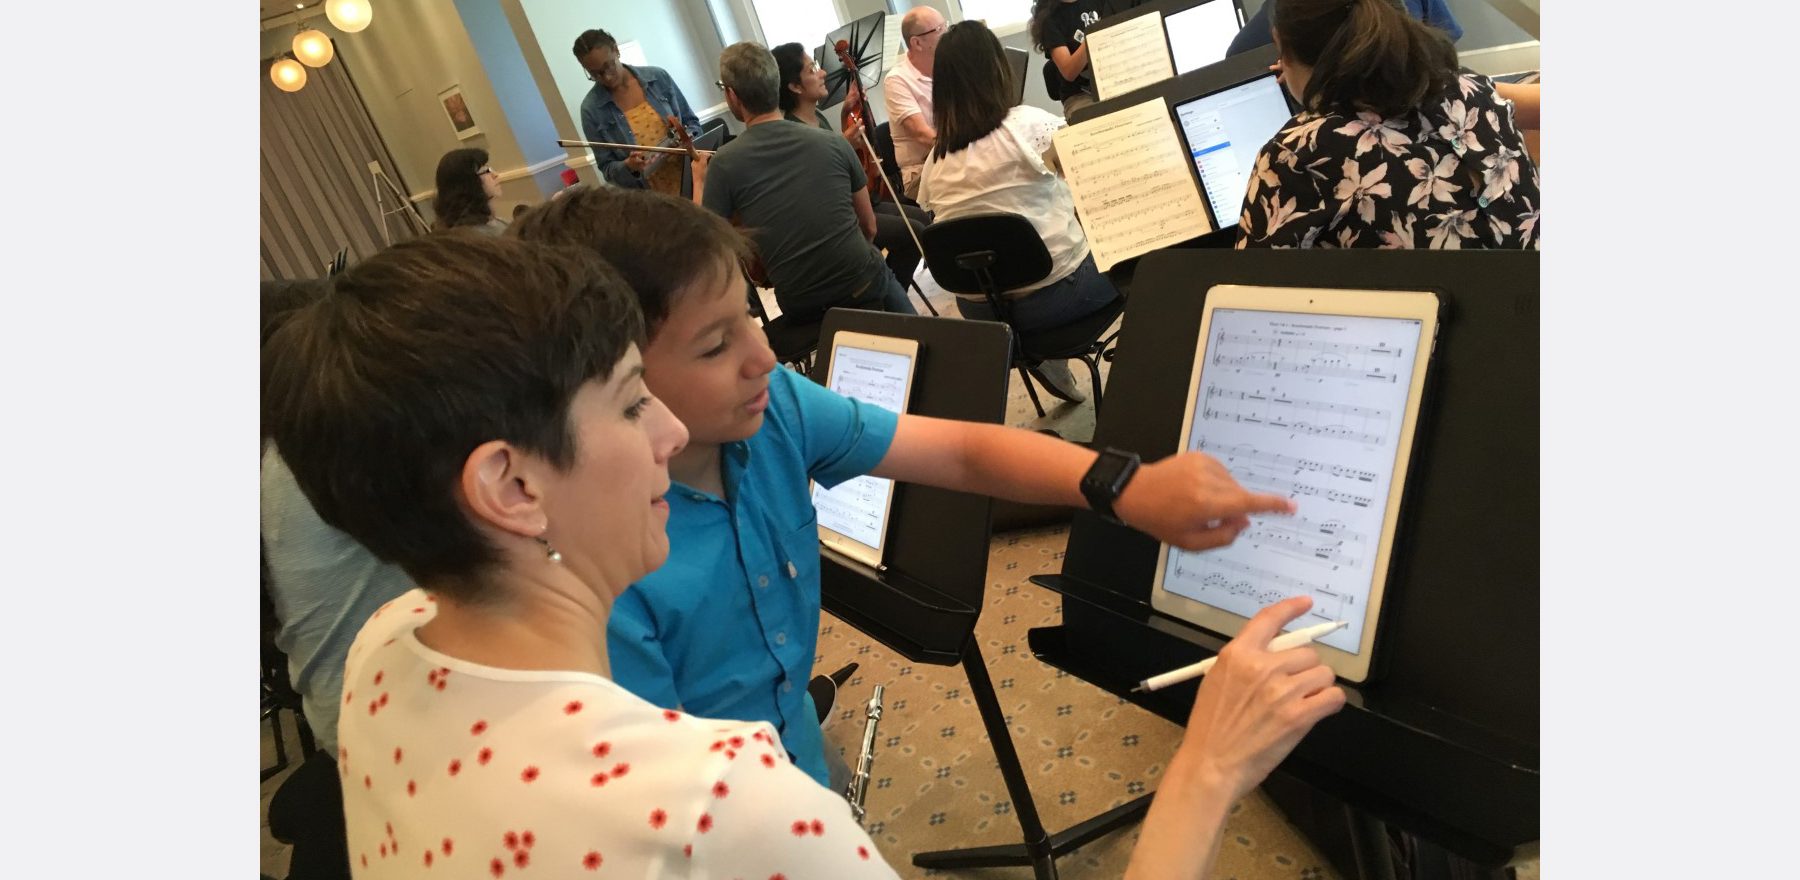 Angel Reverol, a flute student in the Nashville Symphony’s Accelerando program for young musicians, shows his instructor, Leslie Fagan, assistant principal flute with the Nashville Symphony, how to use a tablet with a digital score during a rehearsal.